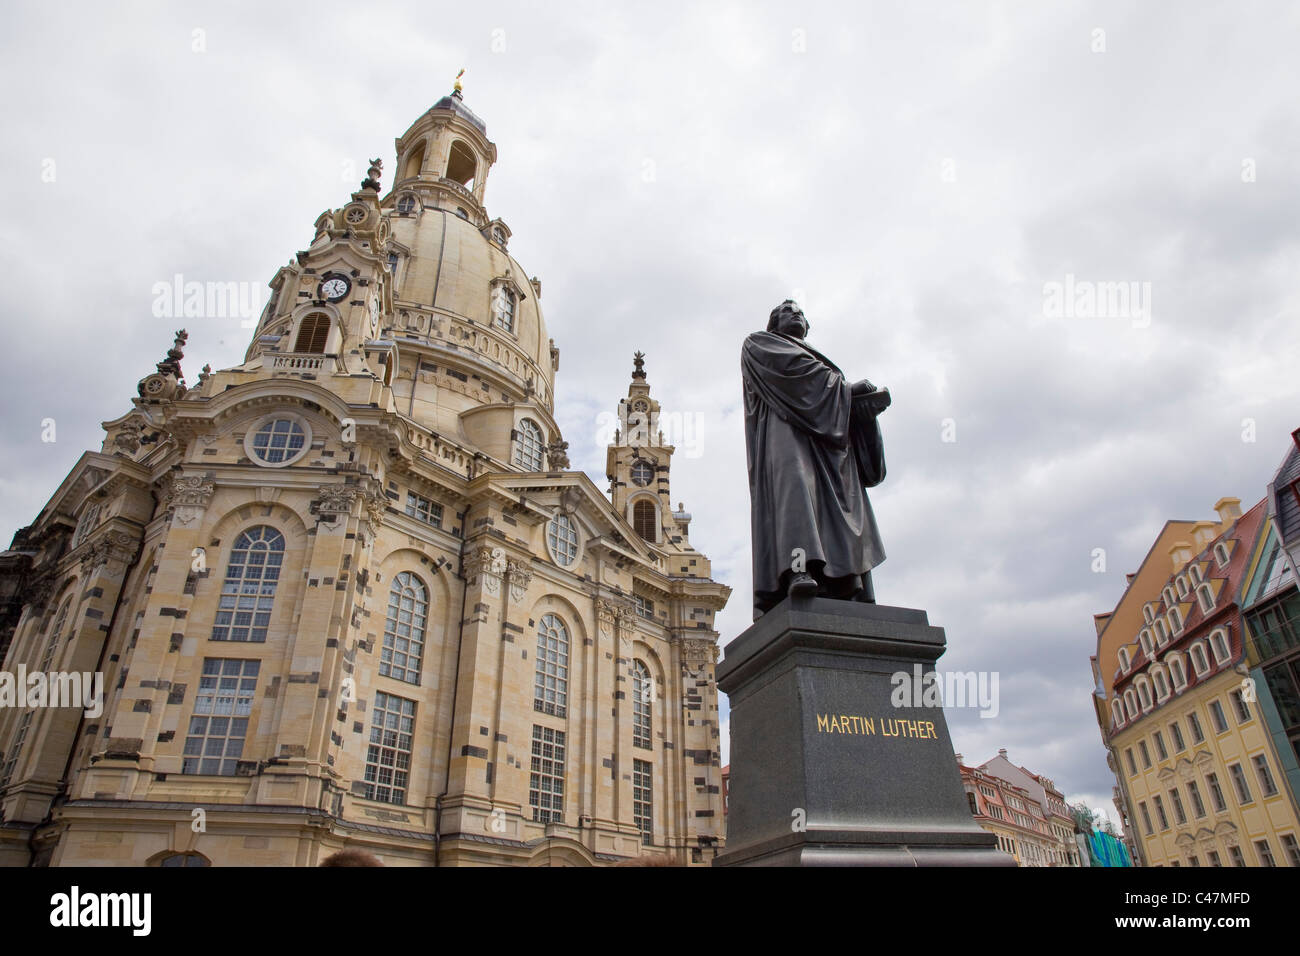 Photograph of the statue of Martin Luther in front of his church in the city of Dresden Stock Photo